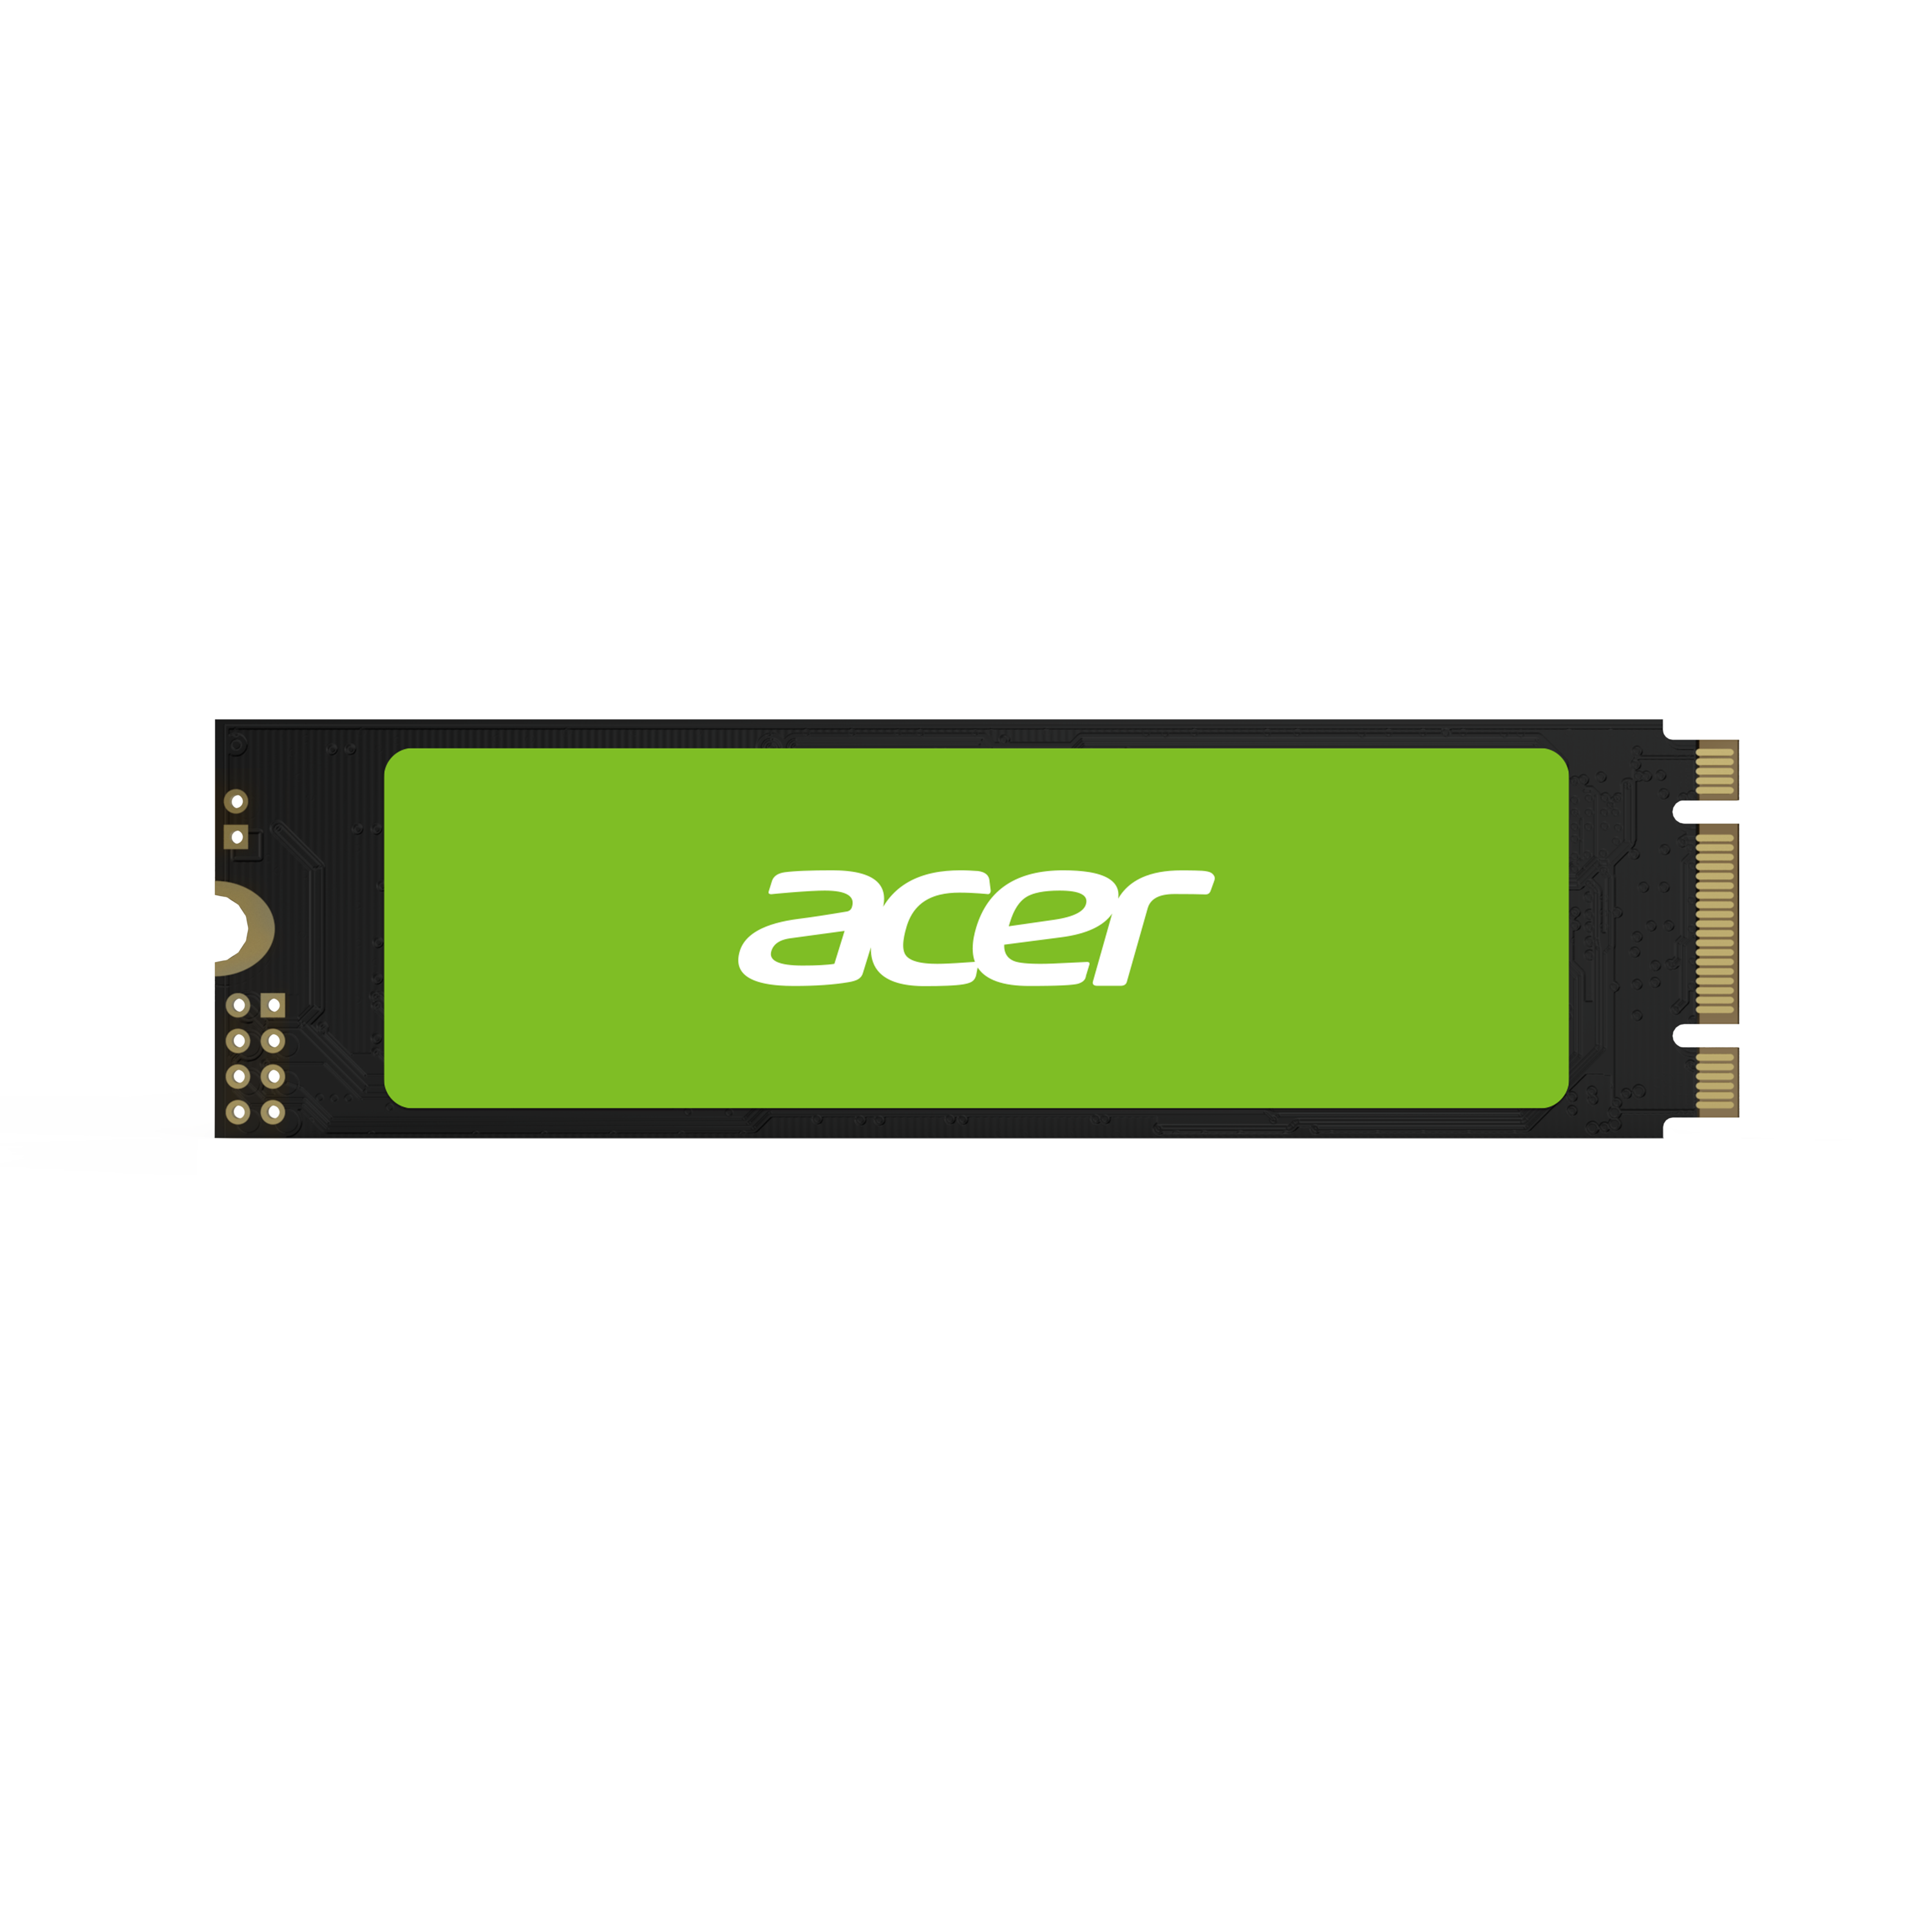 Acer RE100 M.2 SSD full capacity to meet various needs of storage